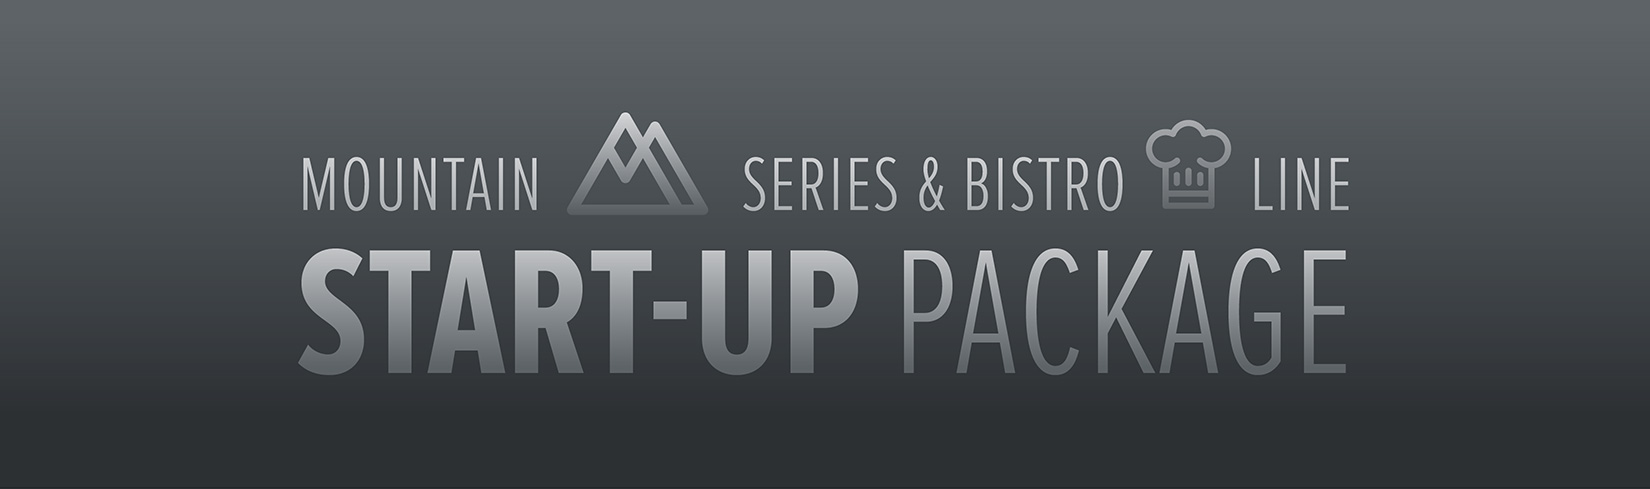 Mountain Series & Bistro Line Start-up Package